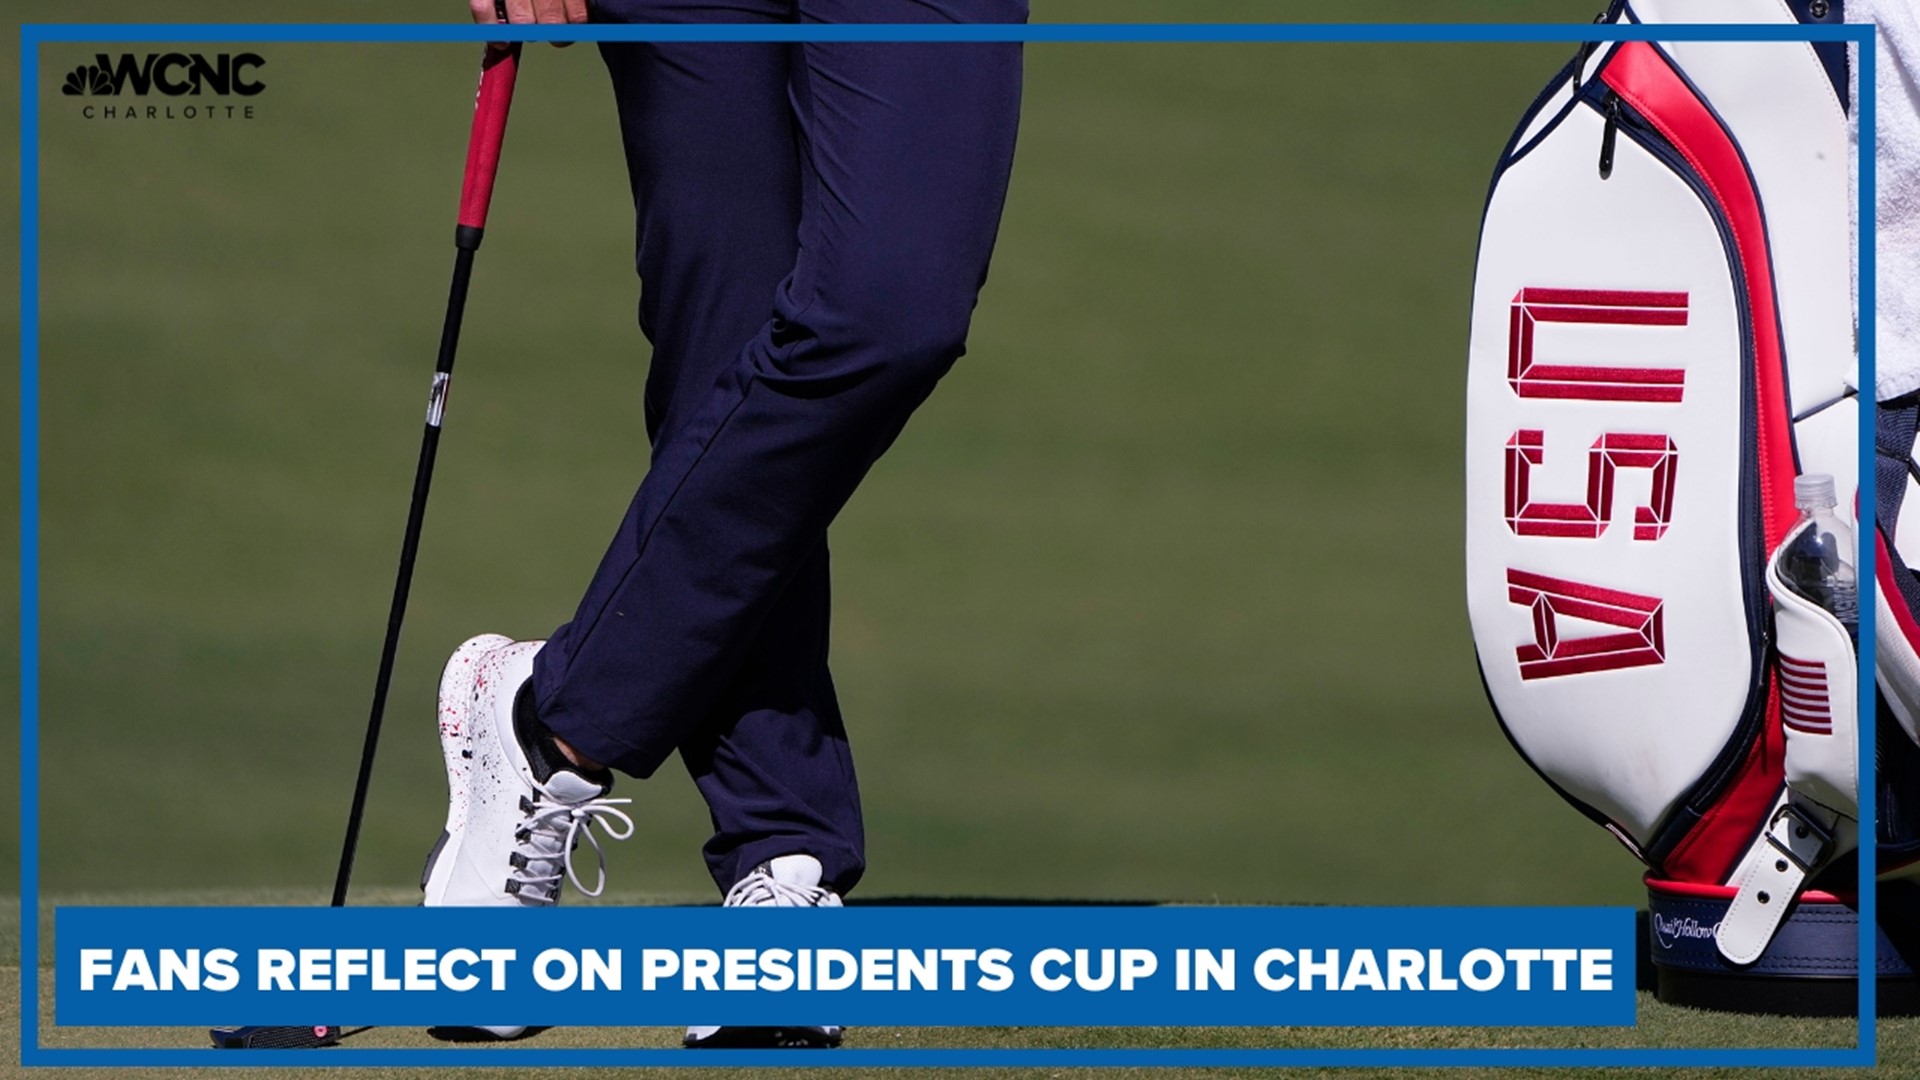 Presidents Cup weekend concludes, fans reflect